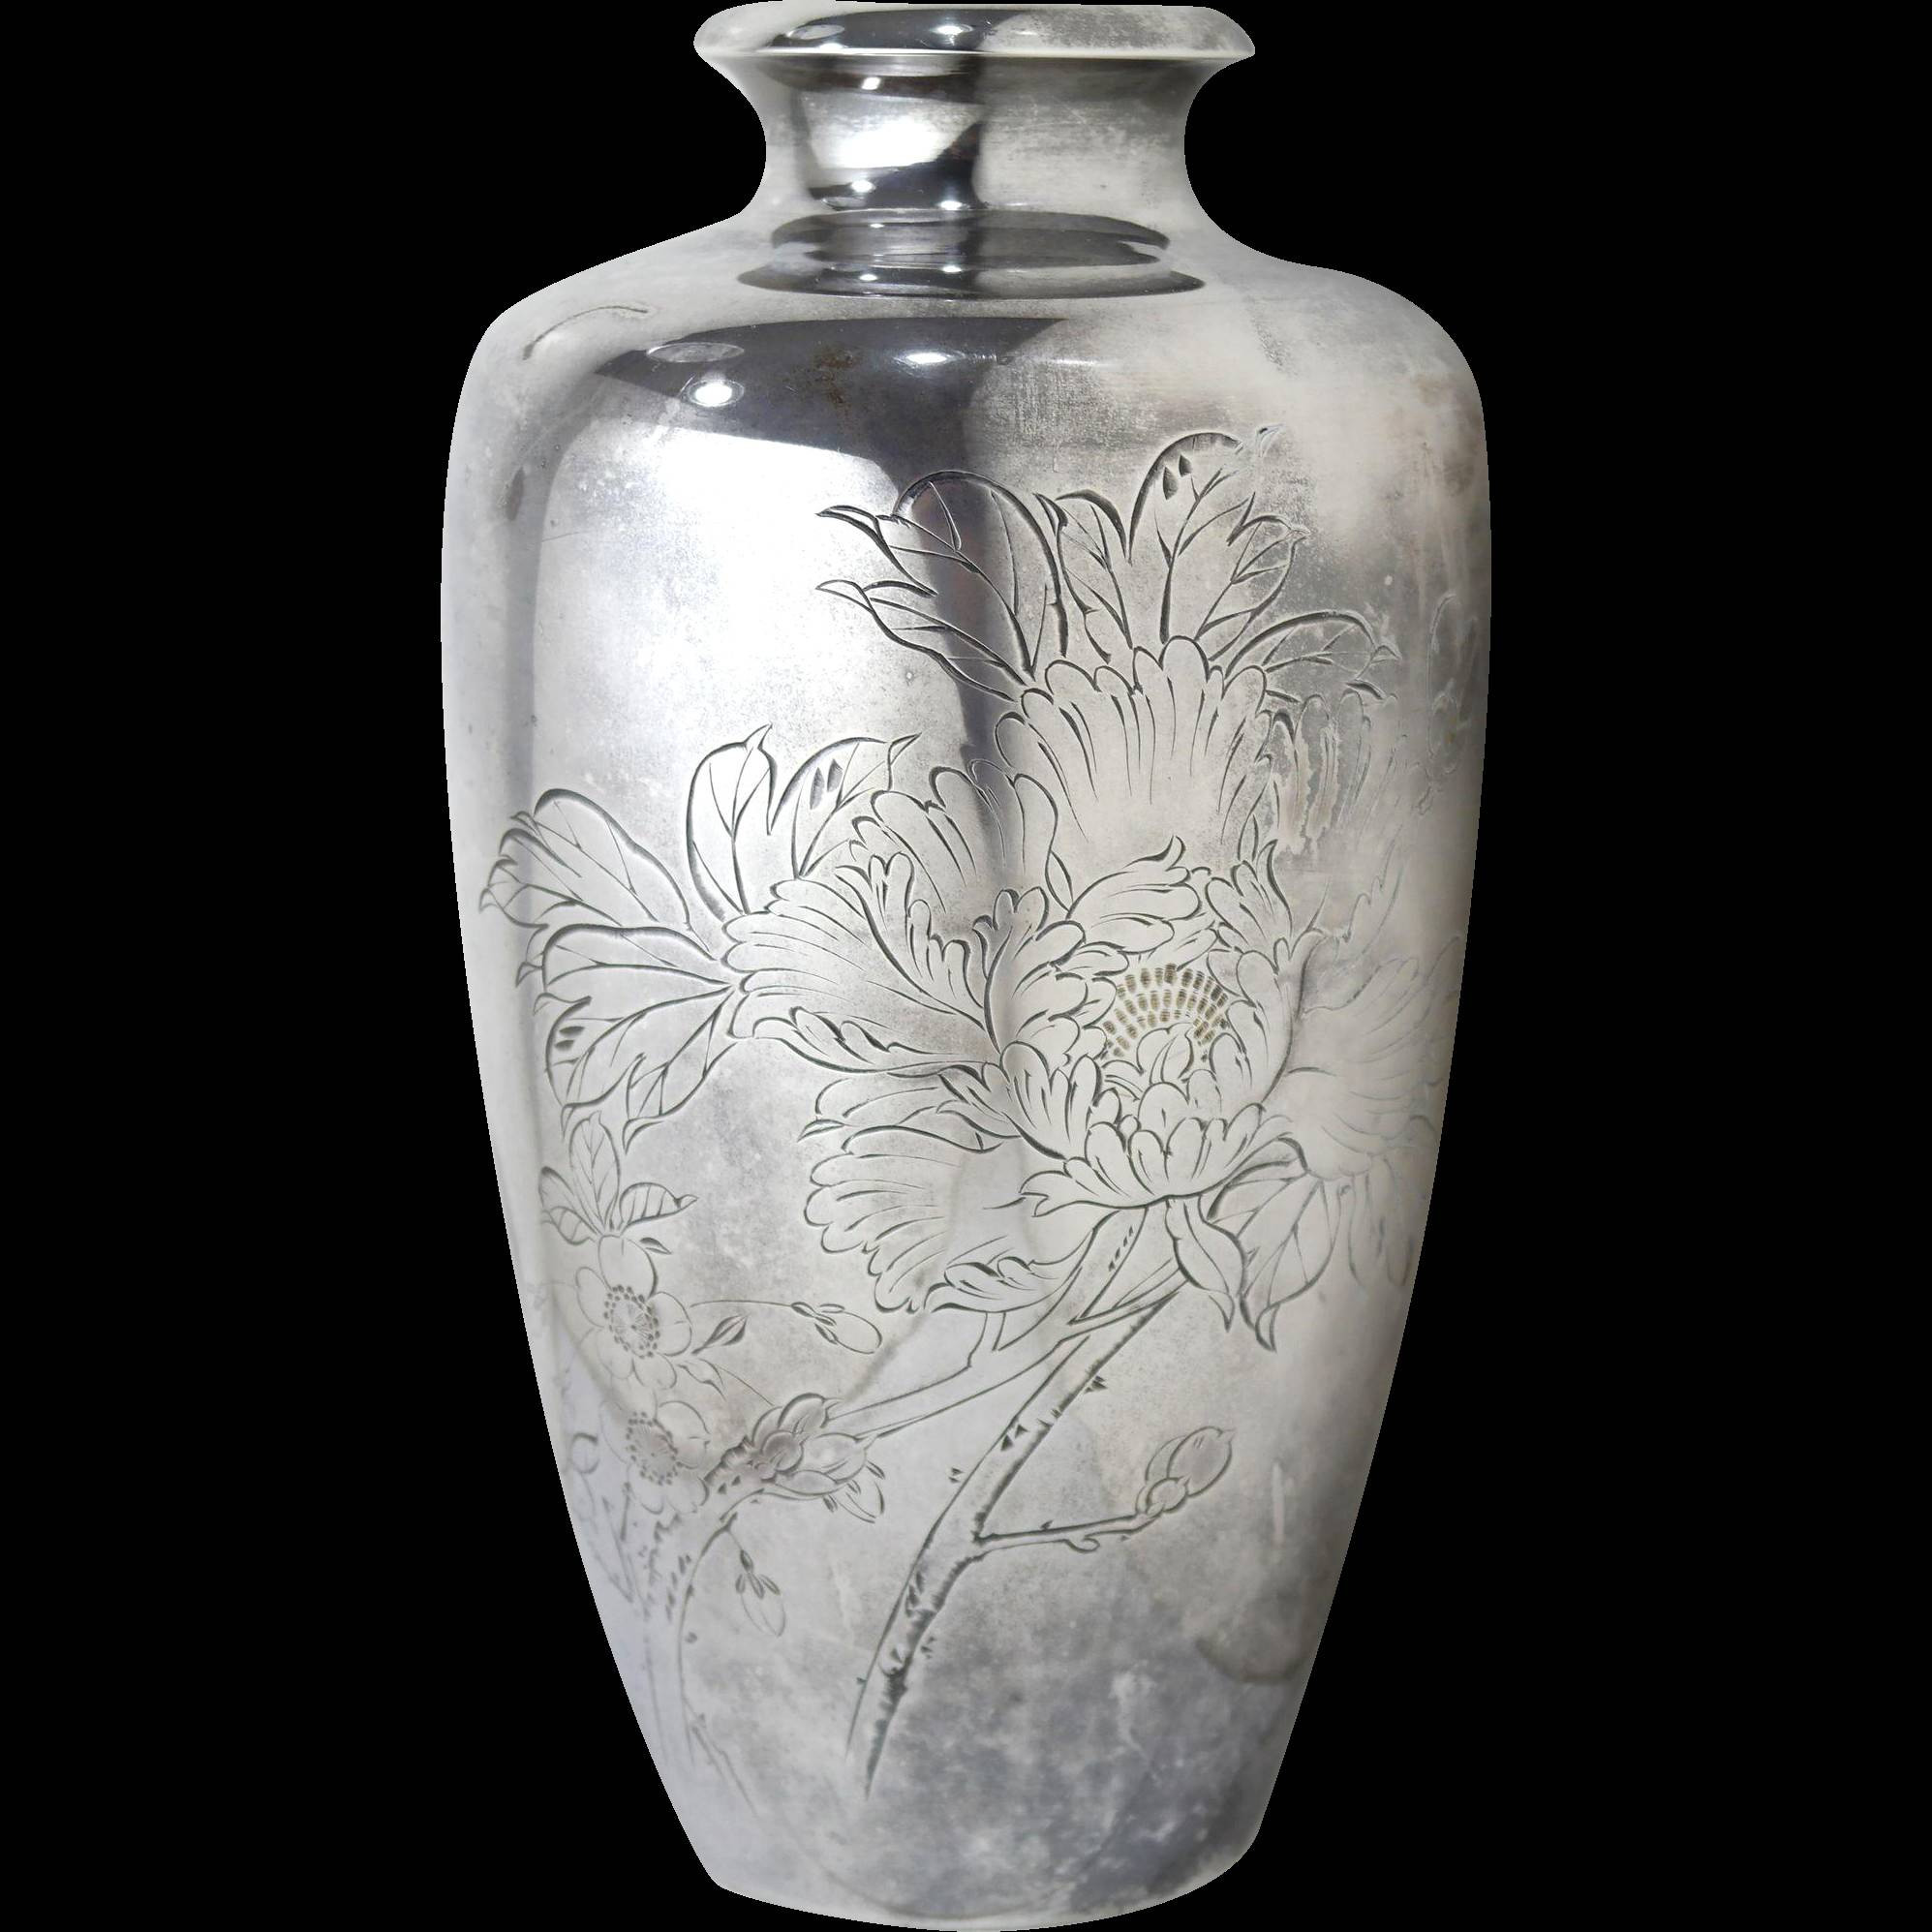 17 Nice Bird Vase White 2024 free download bird vase white of silver wedding decoration ideas awesome xh vases silver vase chinese in silver wedding decoration ideas awesome xh vases silver vase chinese export 1i 0d orchids for weddi